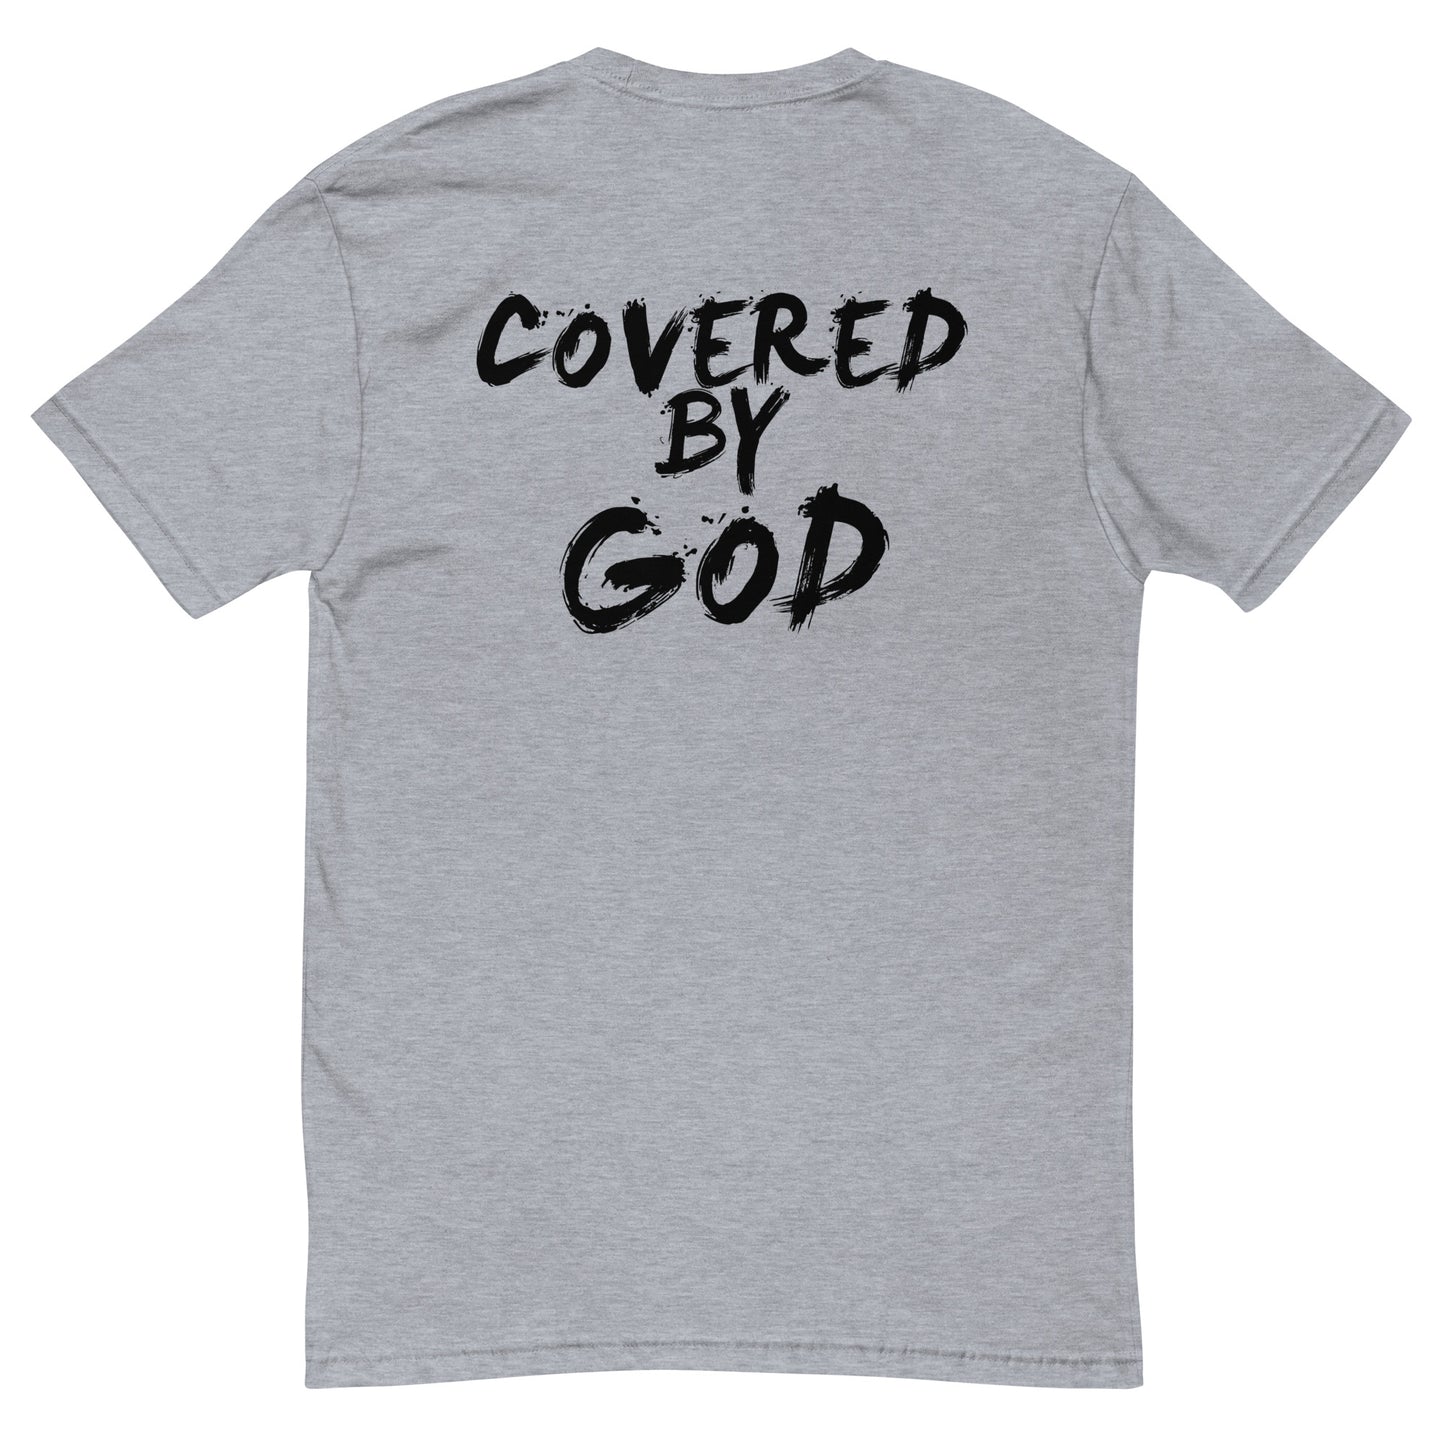 I'm Just Out Here Trusting God Grey T-Shirt